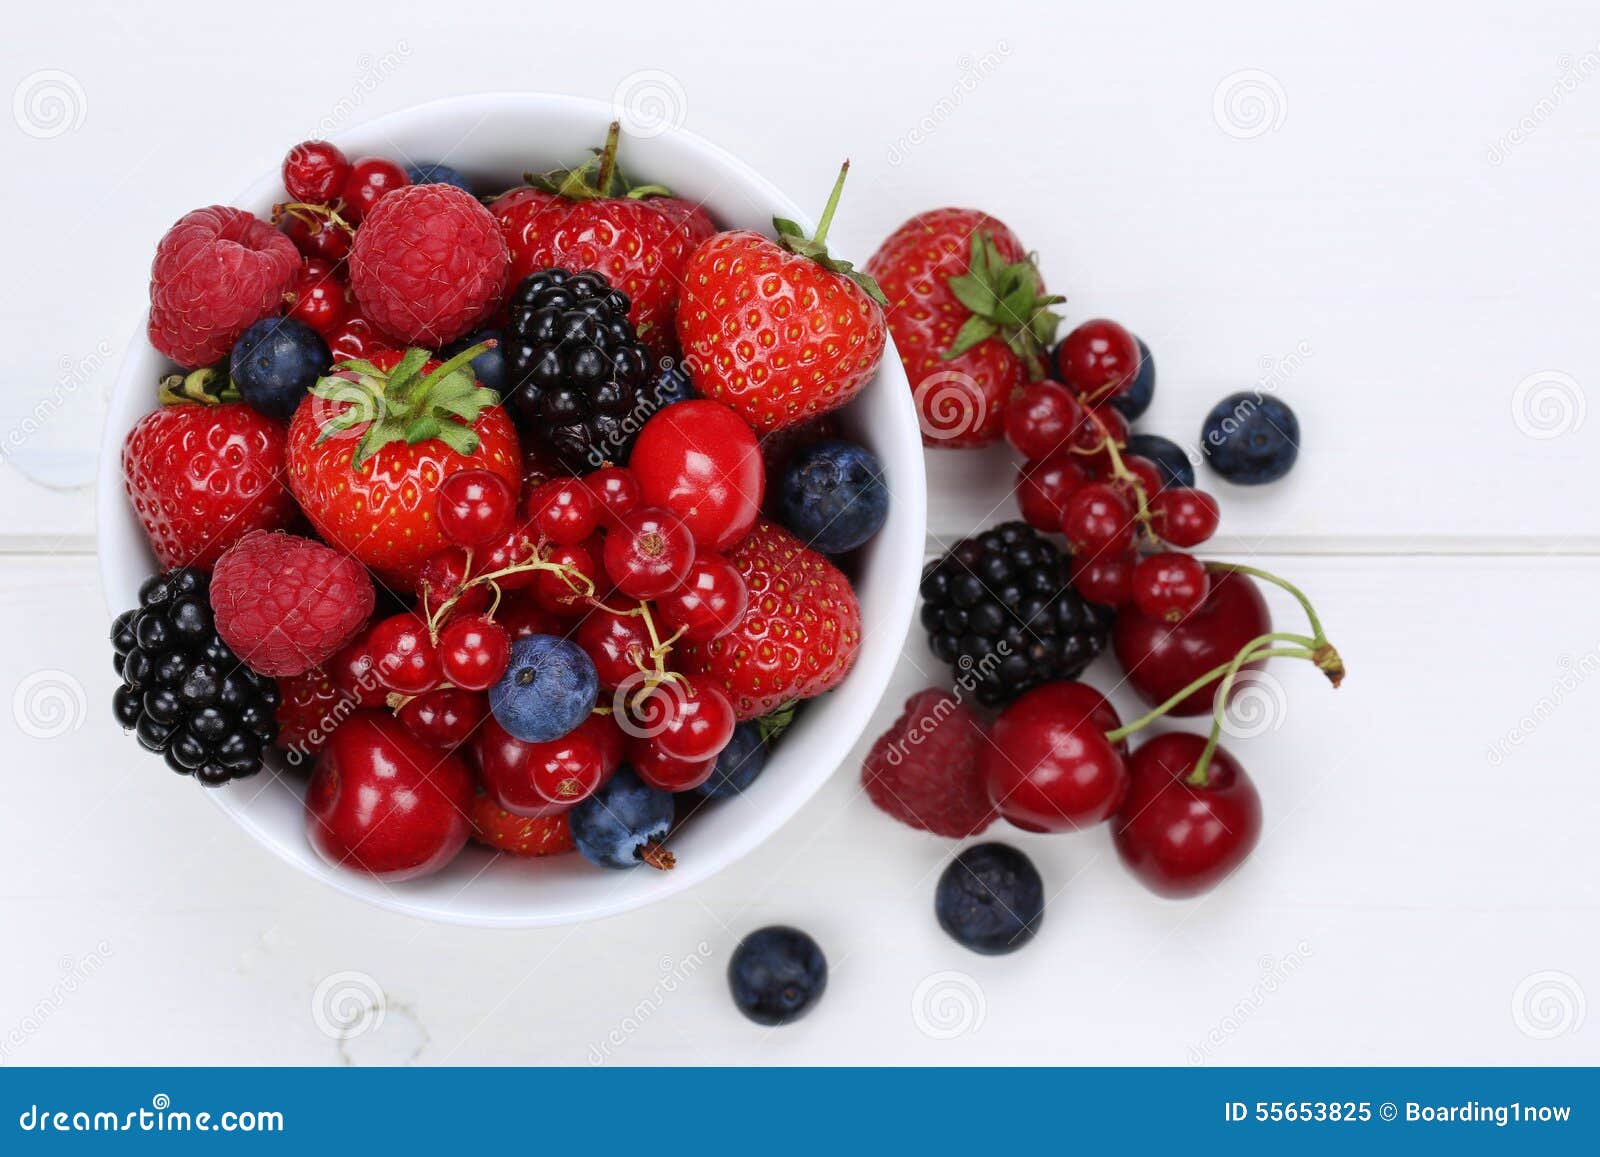 berry fruits mix in bowl with strawberries, blueberries and cherries from above